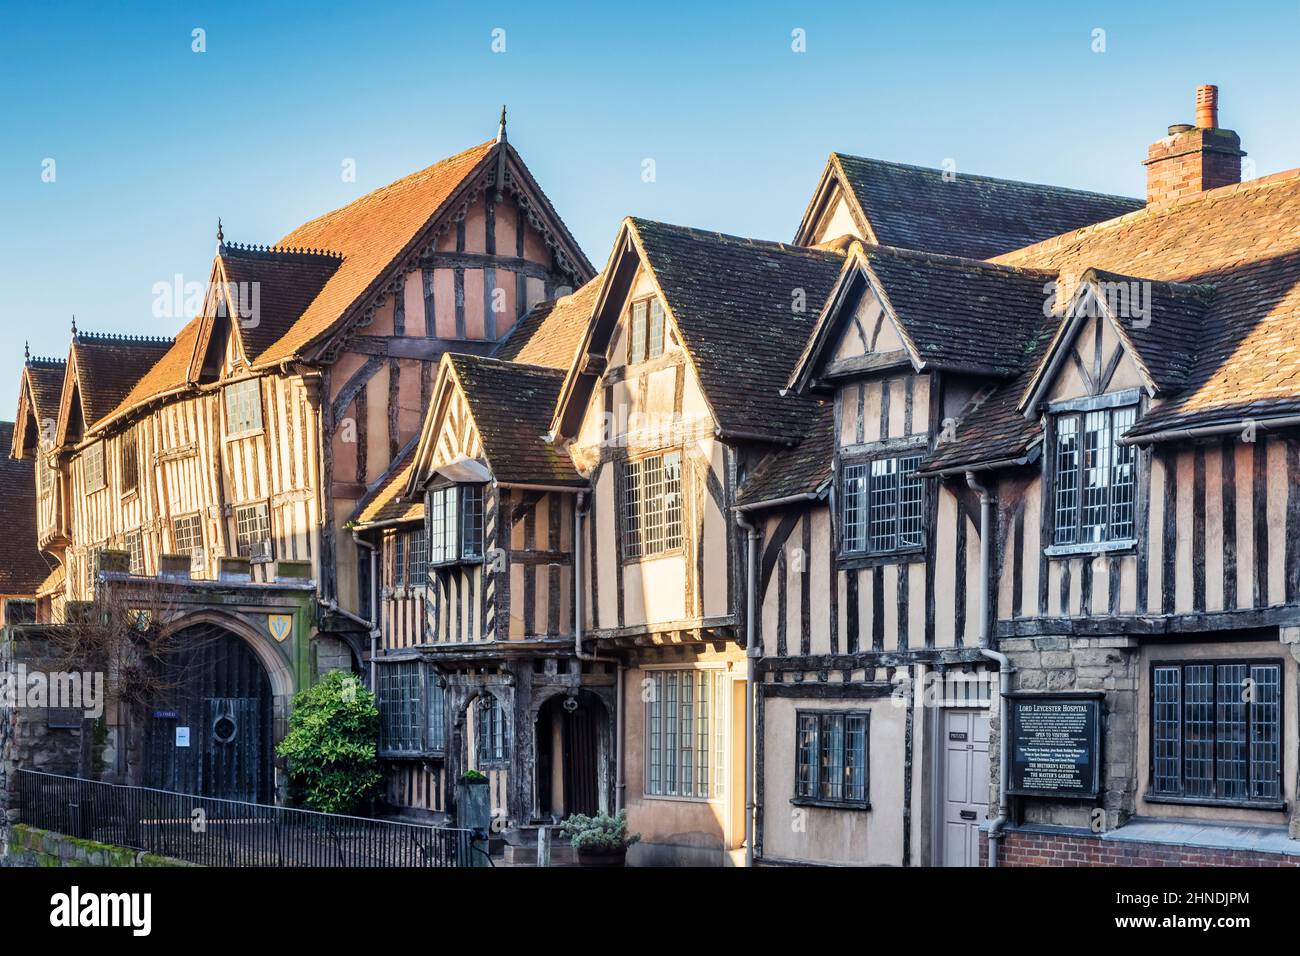 17 January 2022: Warwick, UK - Lord Leycester Hospital, a collection of buildings built between the 13th and 17th centuries, is a charity for the... Stock Photo